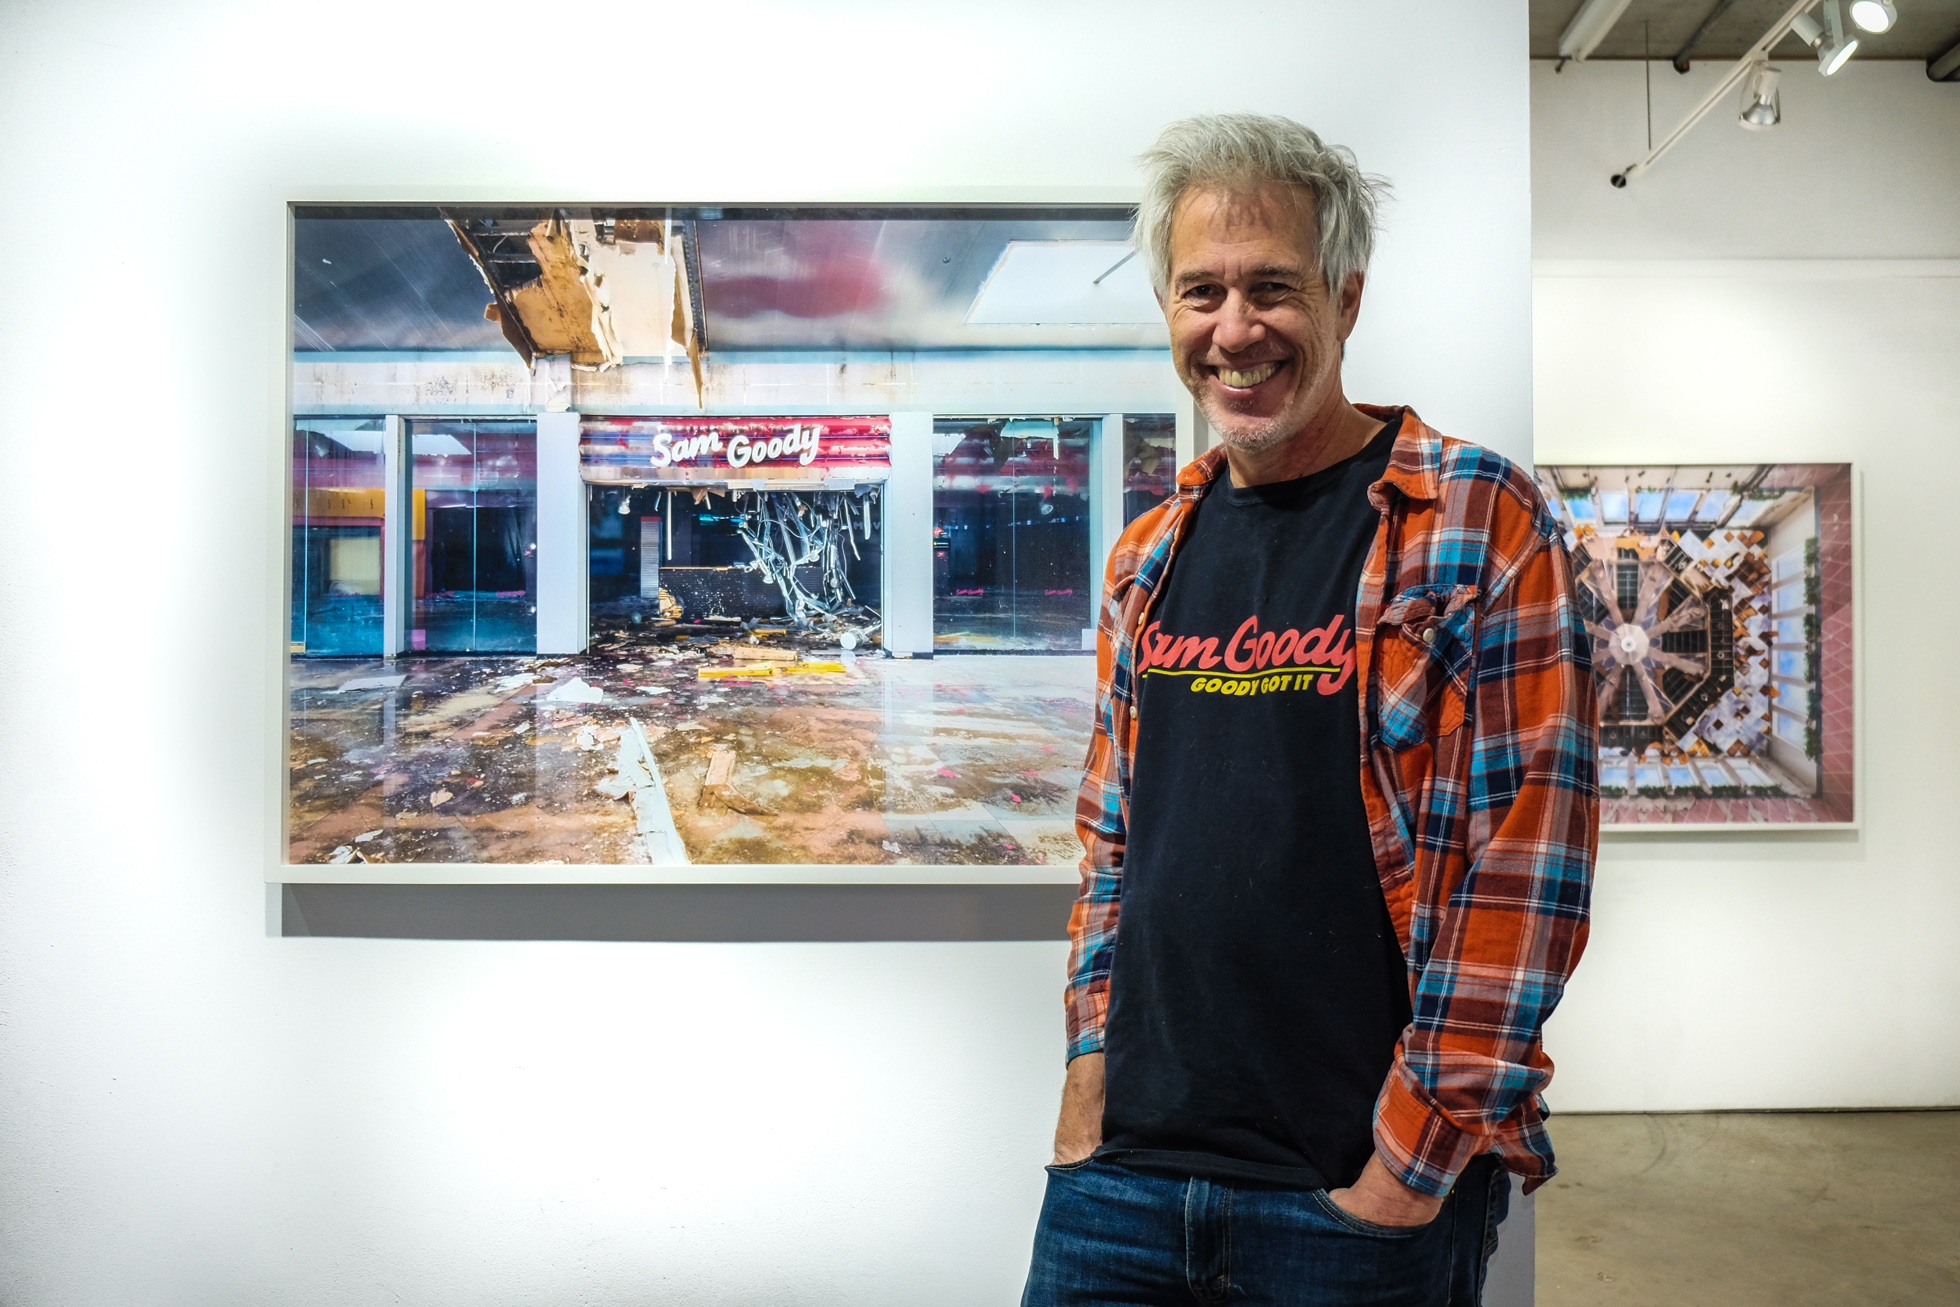 The Death of Wayne Hills Mall in photographs at LES's Front Room Gallery